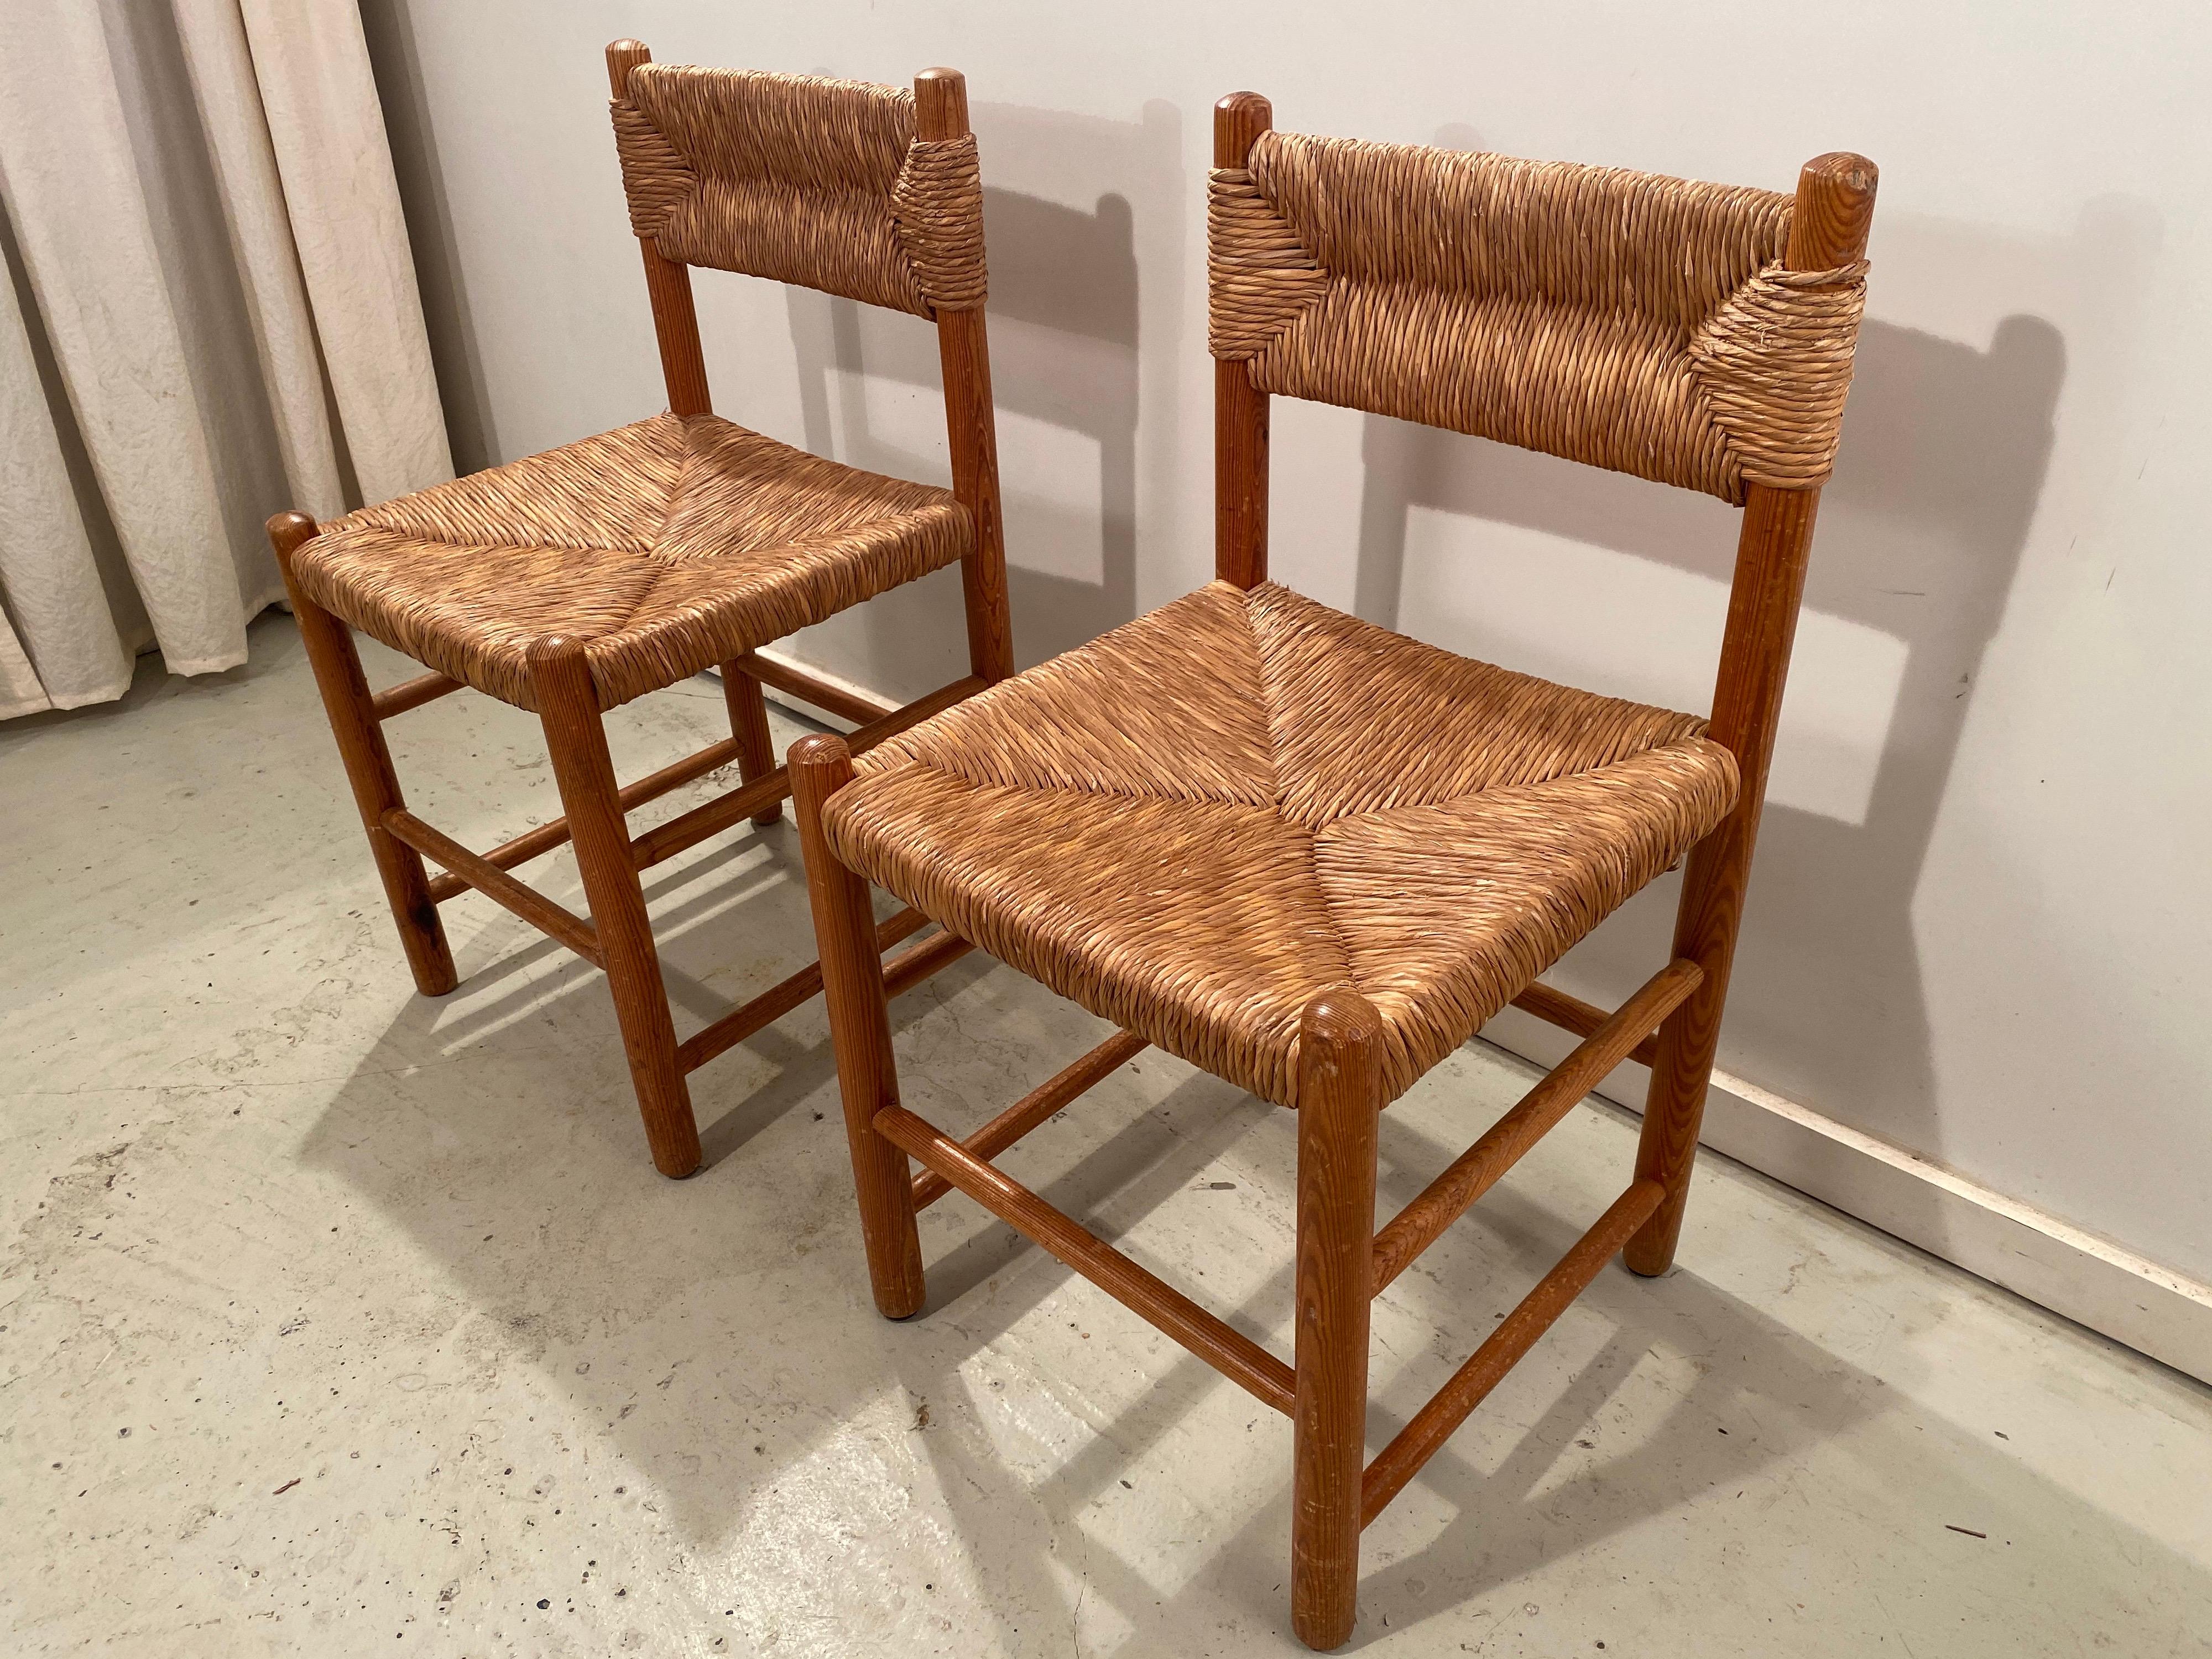 Beautiful pair of dining chairs from the Dordogne series by Charlotte Perriand for Robert Sentou. The wicker seat and back of both chairs are in good vintage condition.
See other listing for another pair of these chairs; the frame of all 4 are